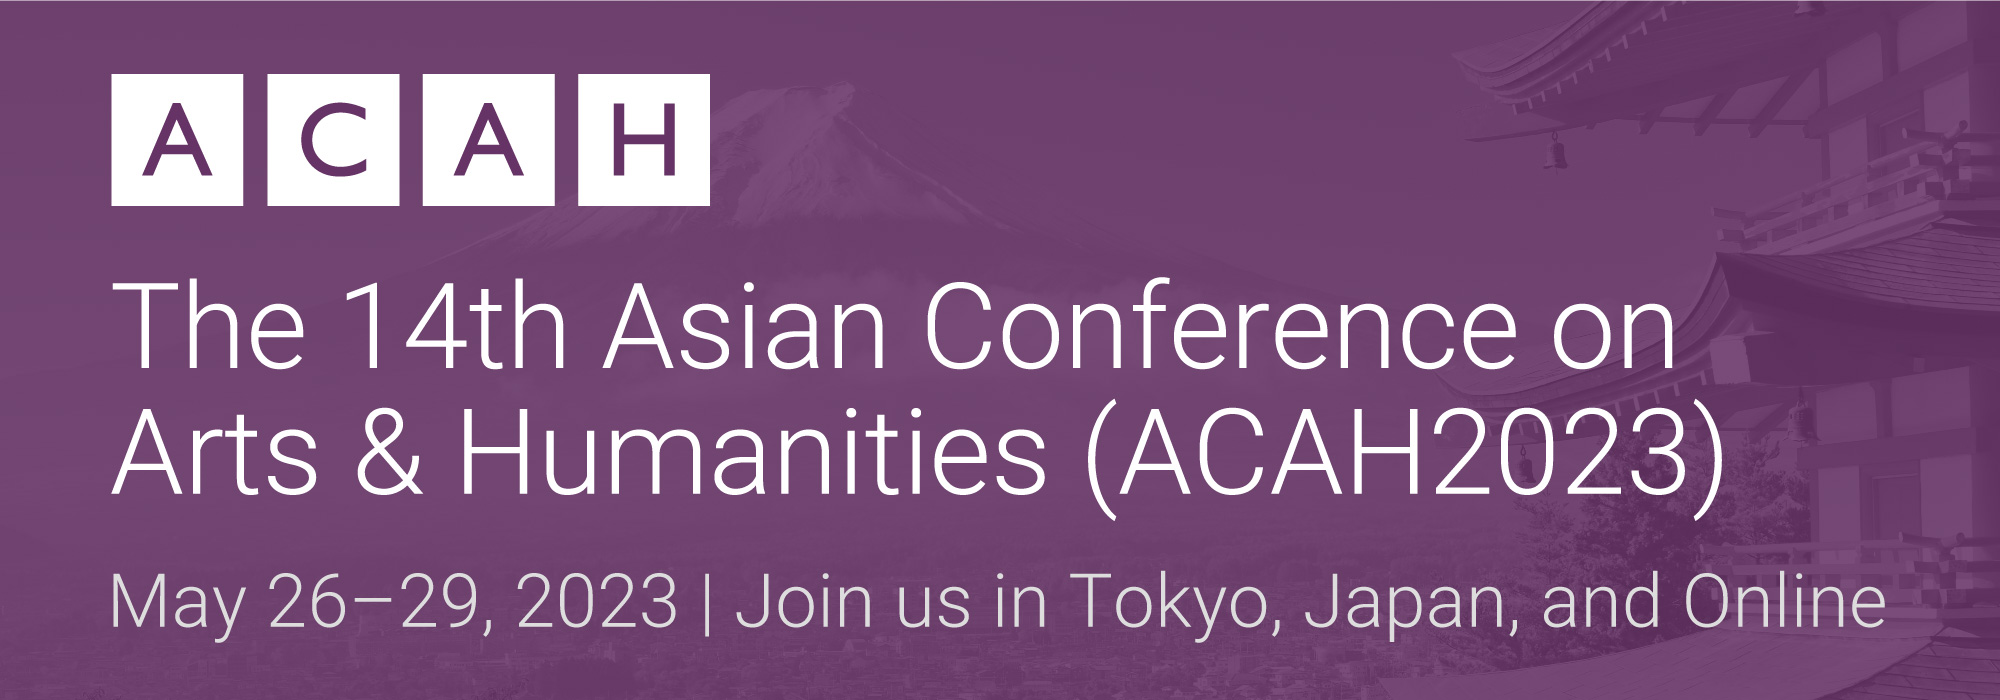 The 14th Asian Conference on Arts & Humanities (ACAH2023) Logo